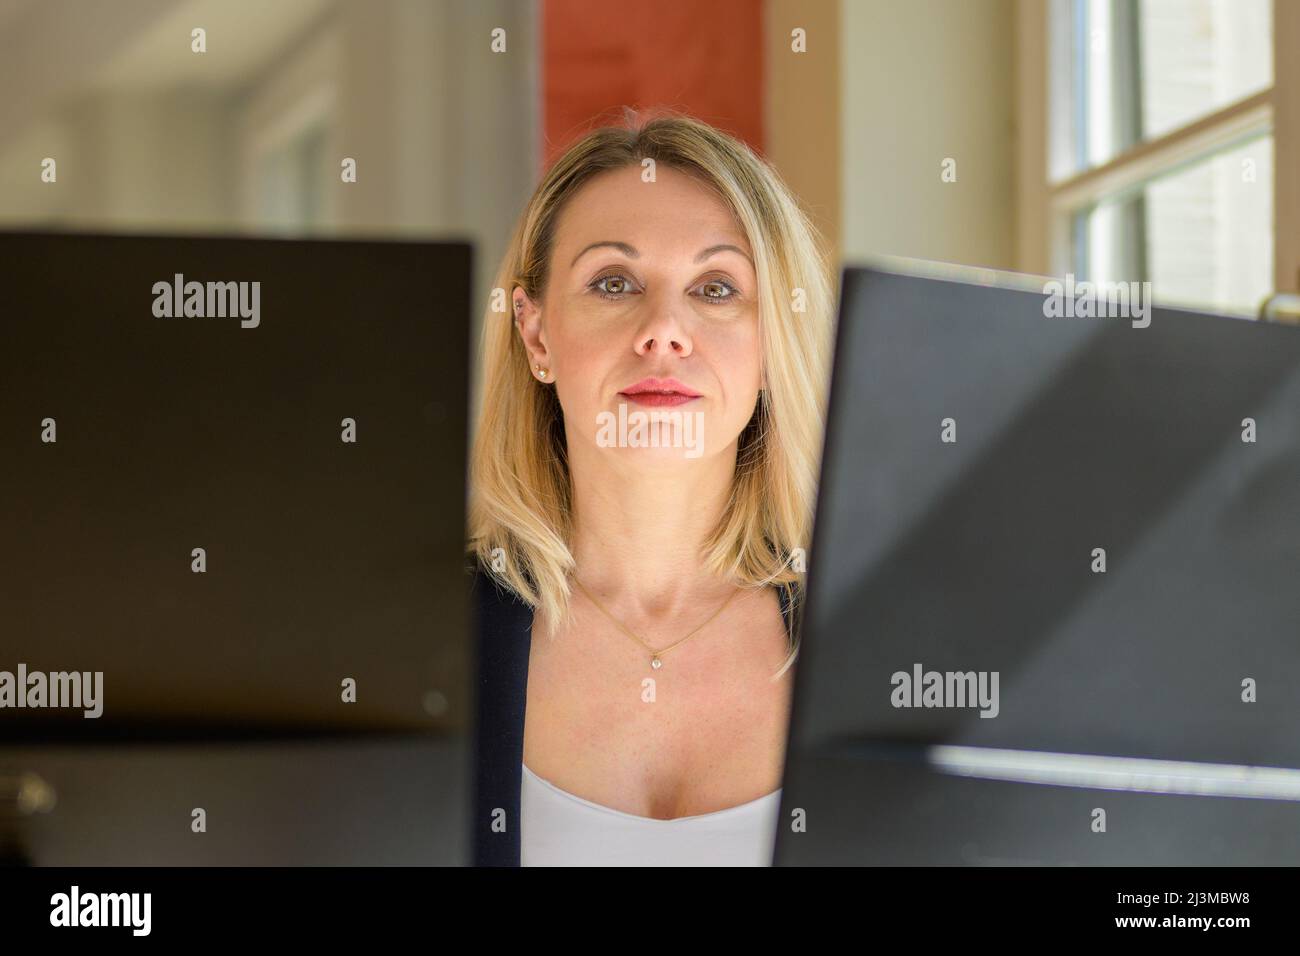 Close up of a confident businesswoman or manageress looking at the camera with a thoughtful expression Stock Photo